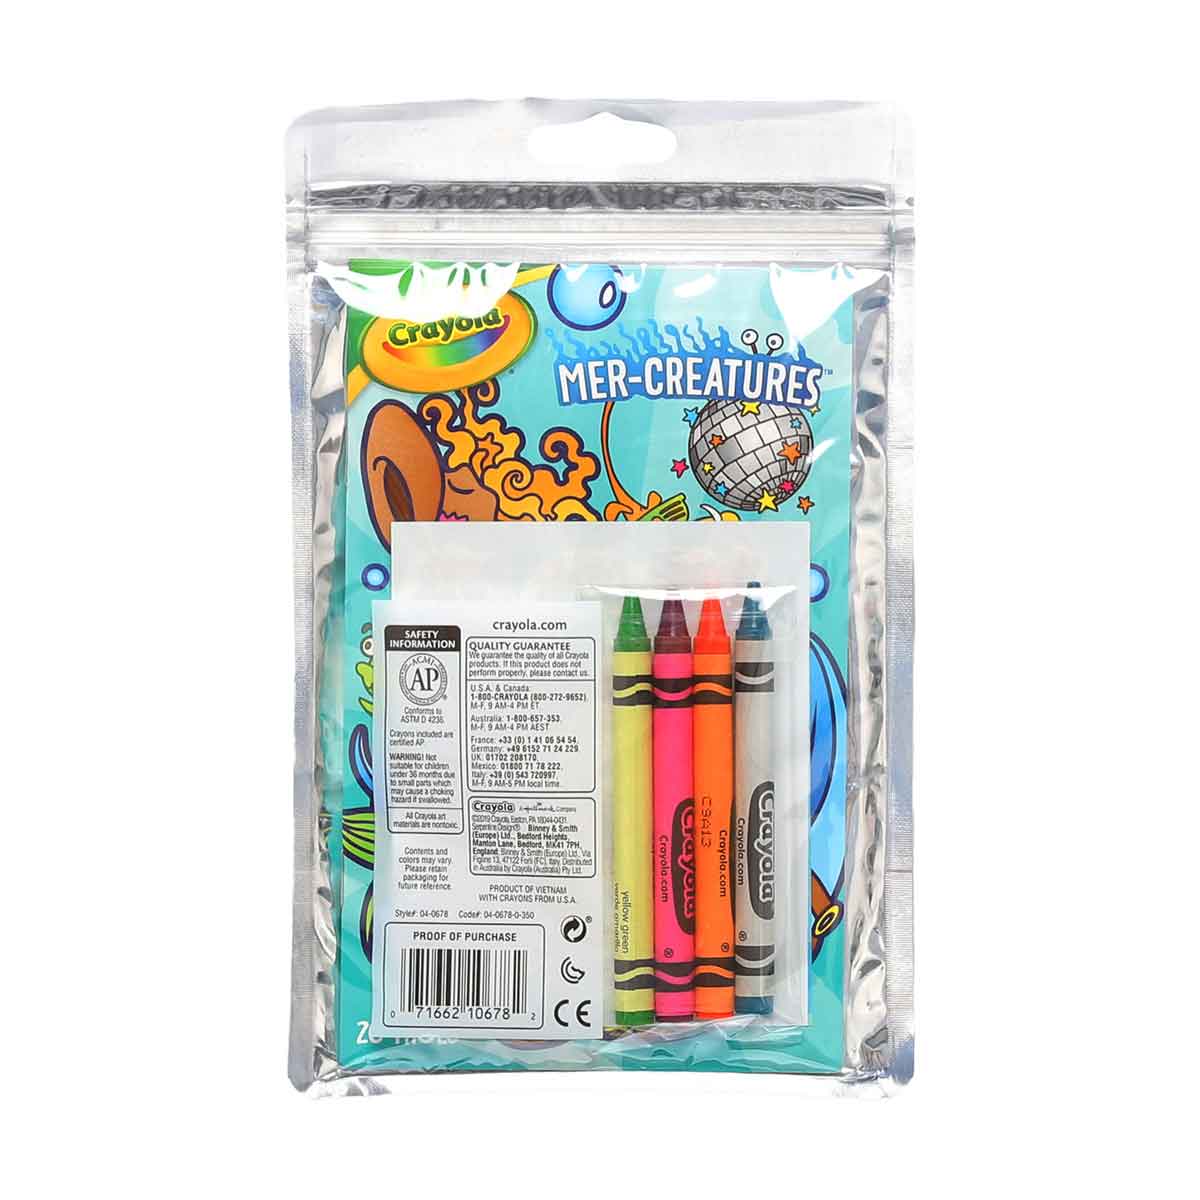 Crayola Coloring Pack with Mercreatures, 20 Mini Coloring Pages